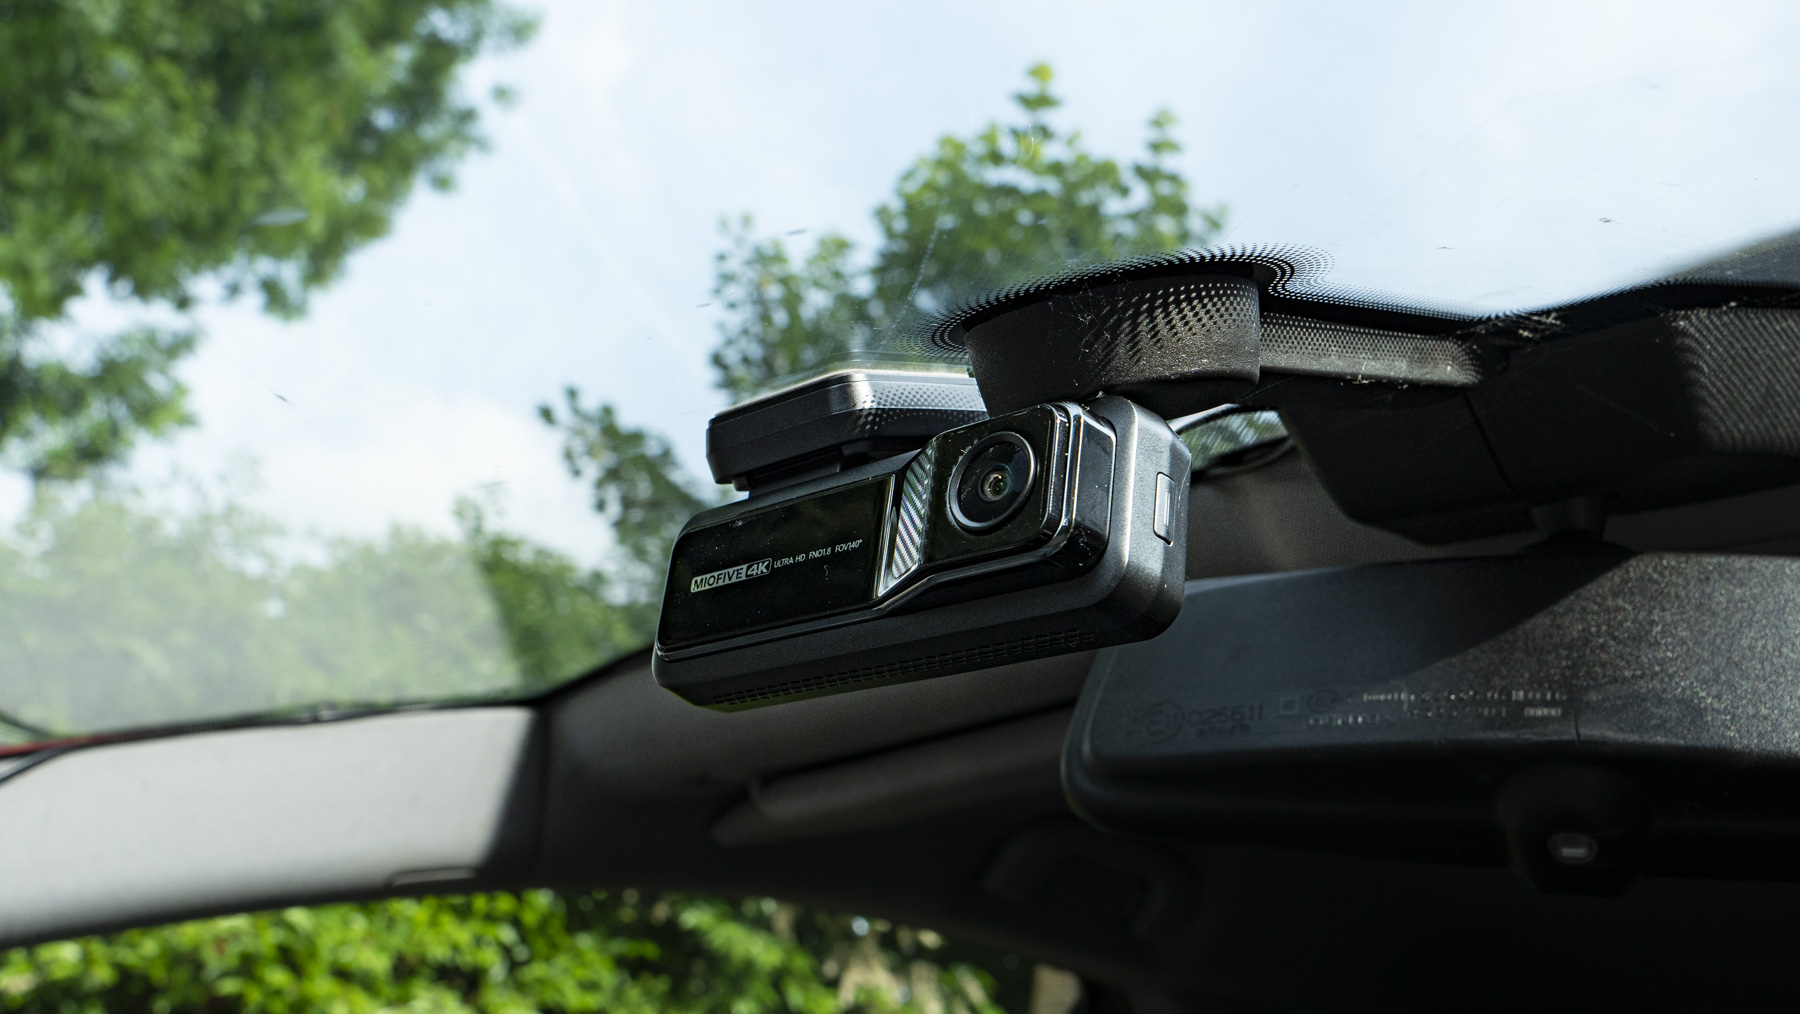 Miofive Dual Dash Cam front camera attached to a windscreen